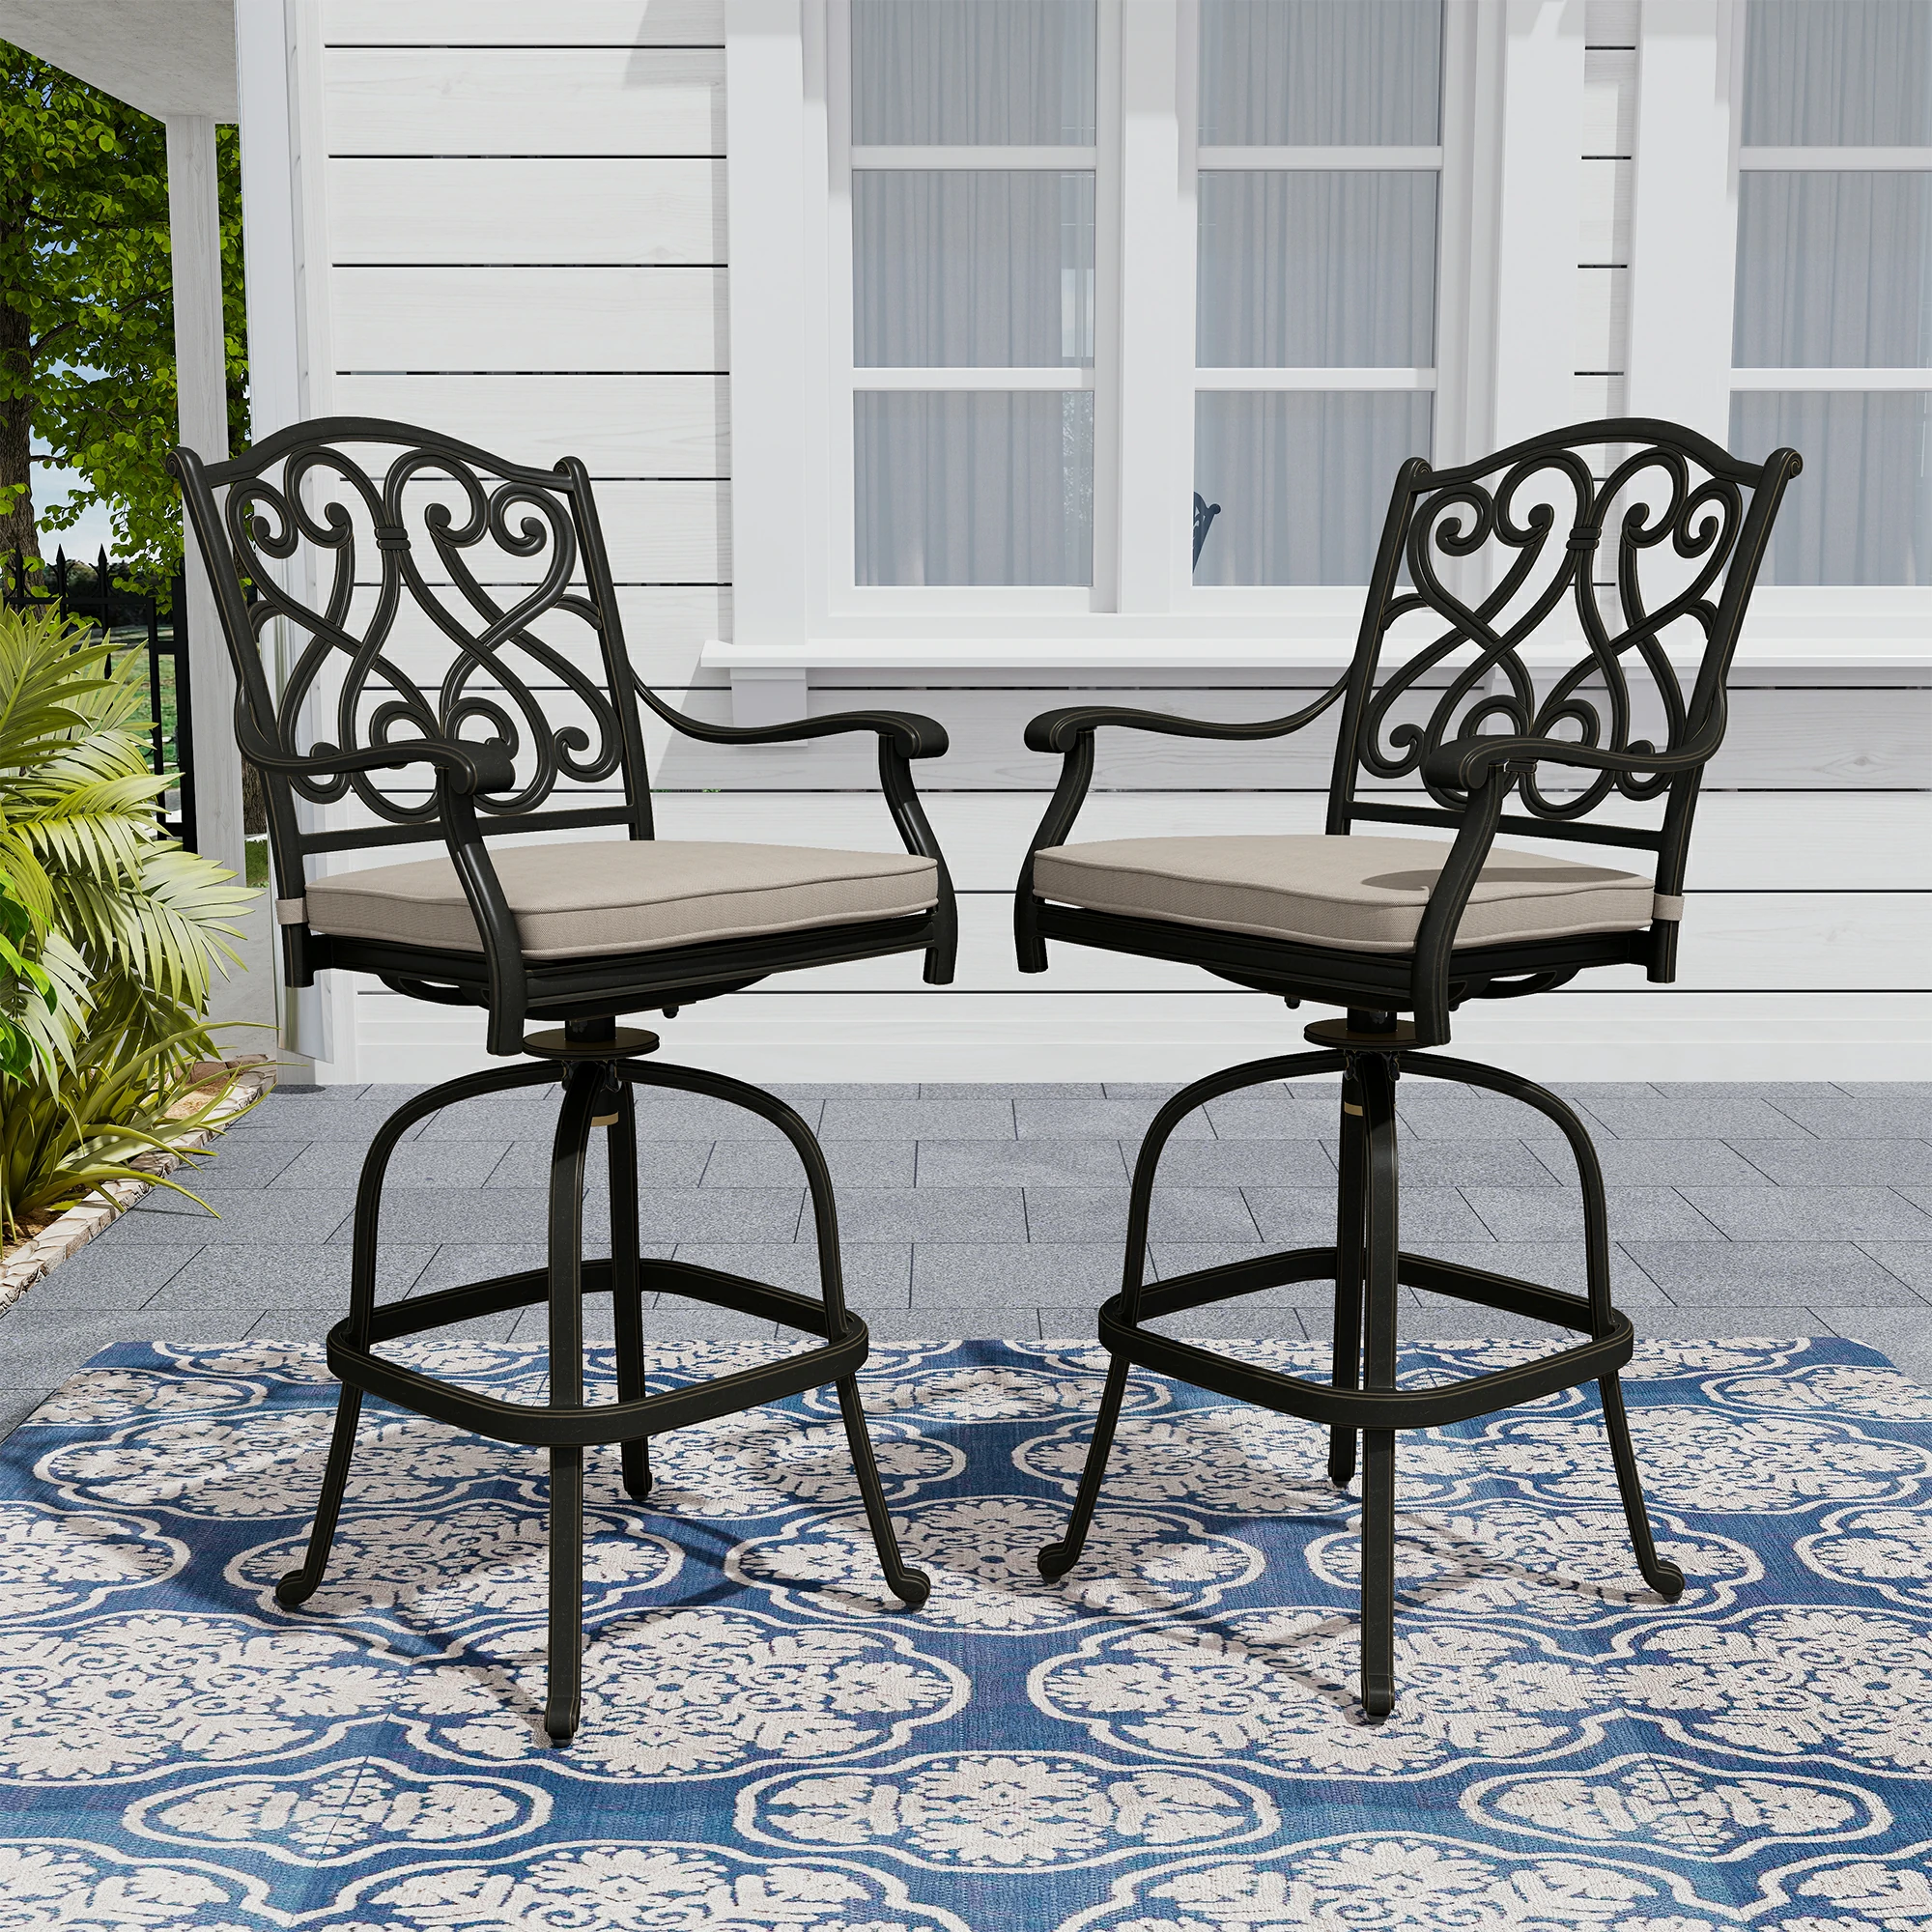 Set of 2 Patio Dining Chairs with Removable Olefin Cushion Cast Aluminum Frame 360° Swivel Bar Stool 